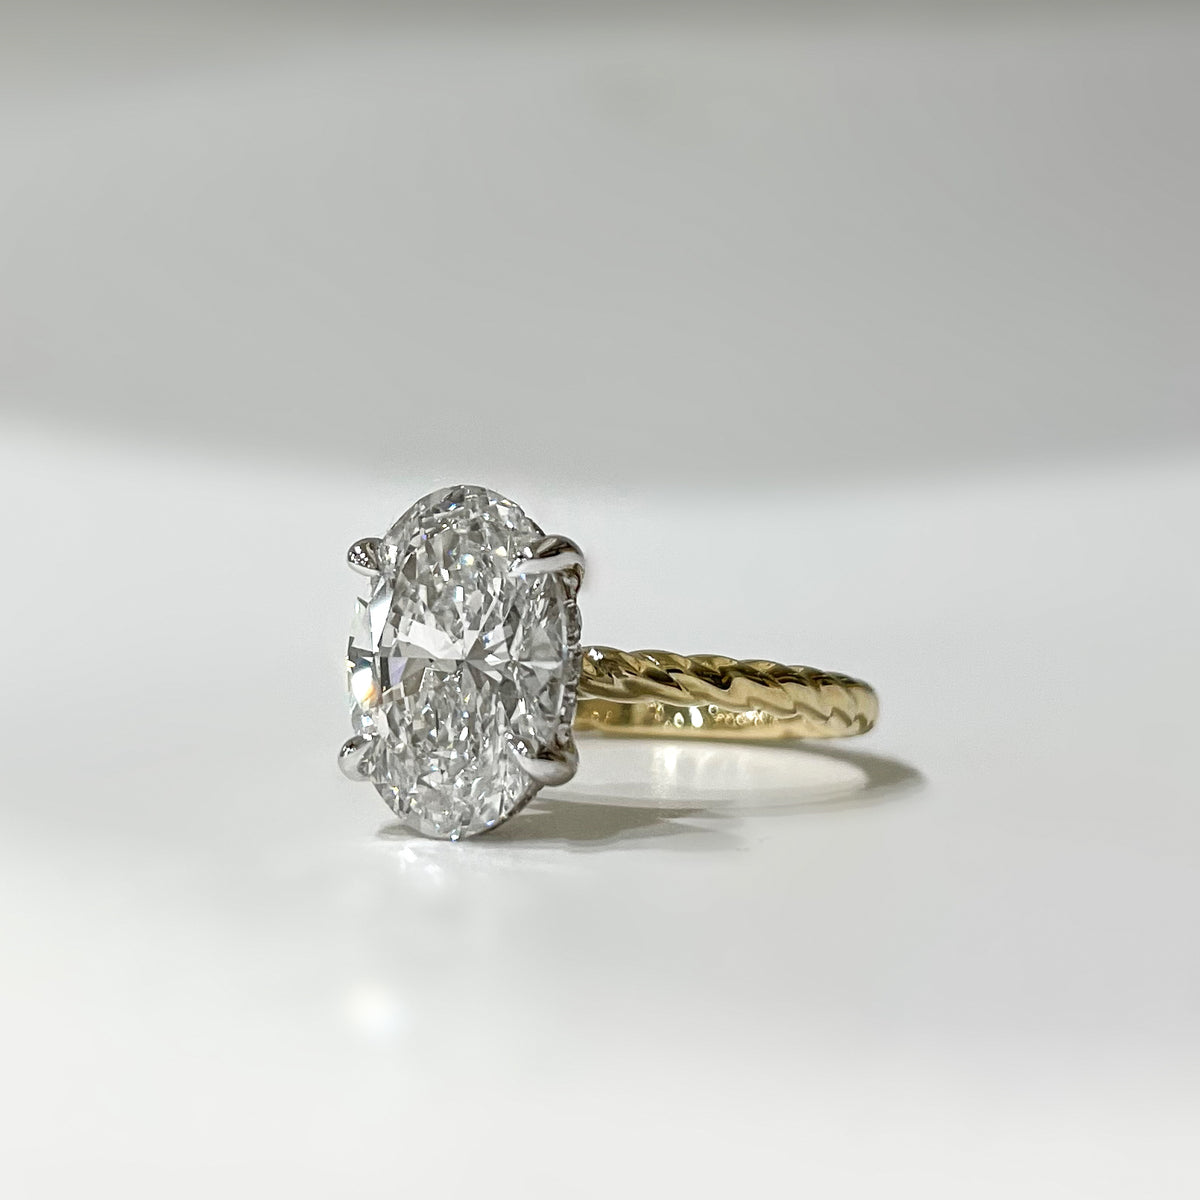 3.01ct Oval Cut Lab Grown Diamond in a Solitaire